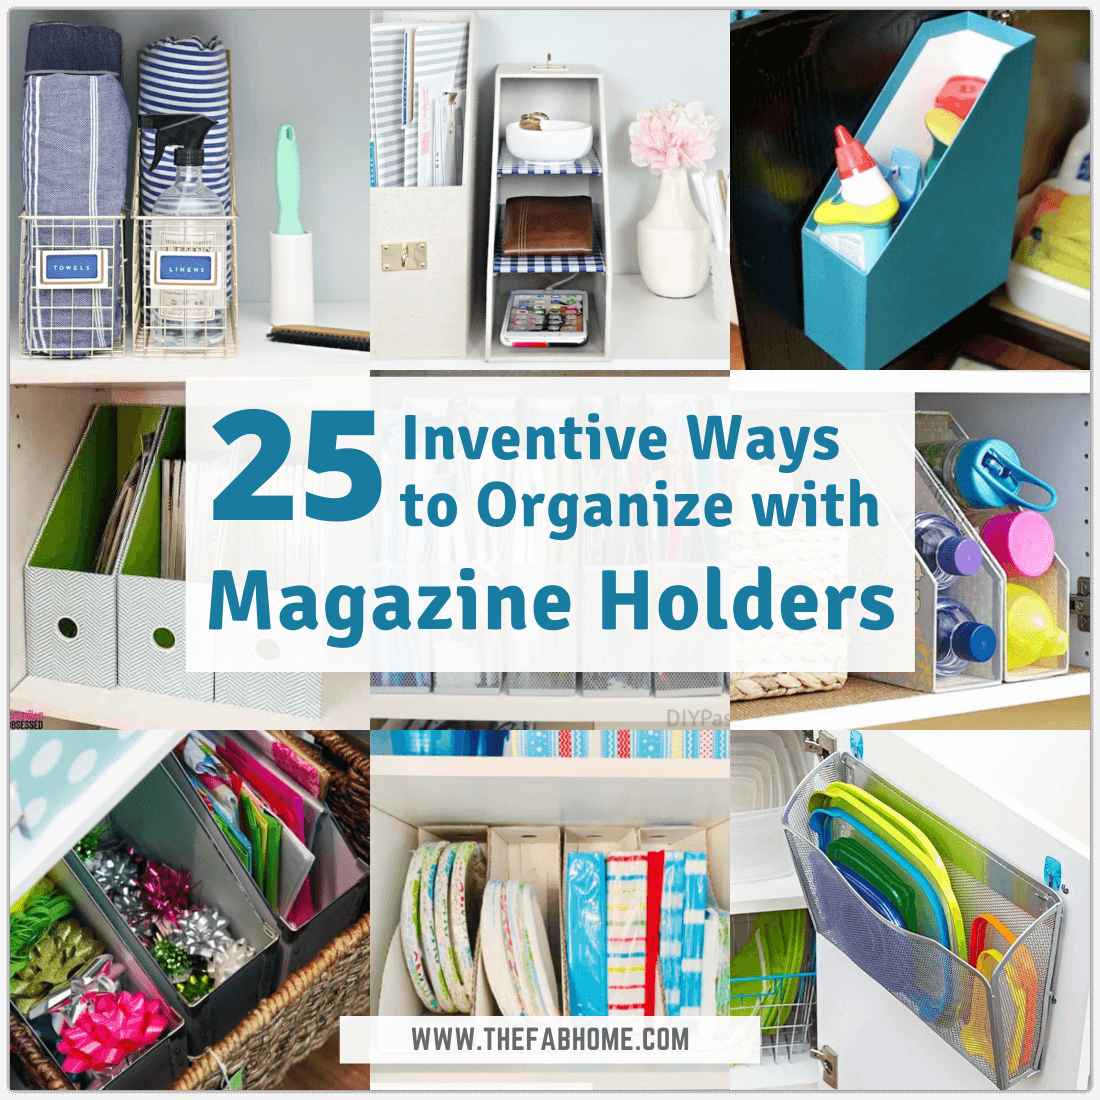 30 Clever Ways to Organize With Magazine Holders - Organization